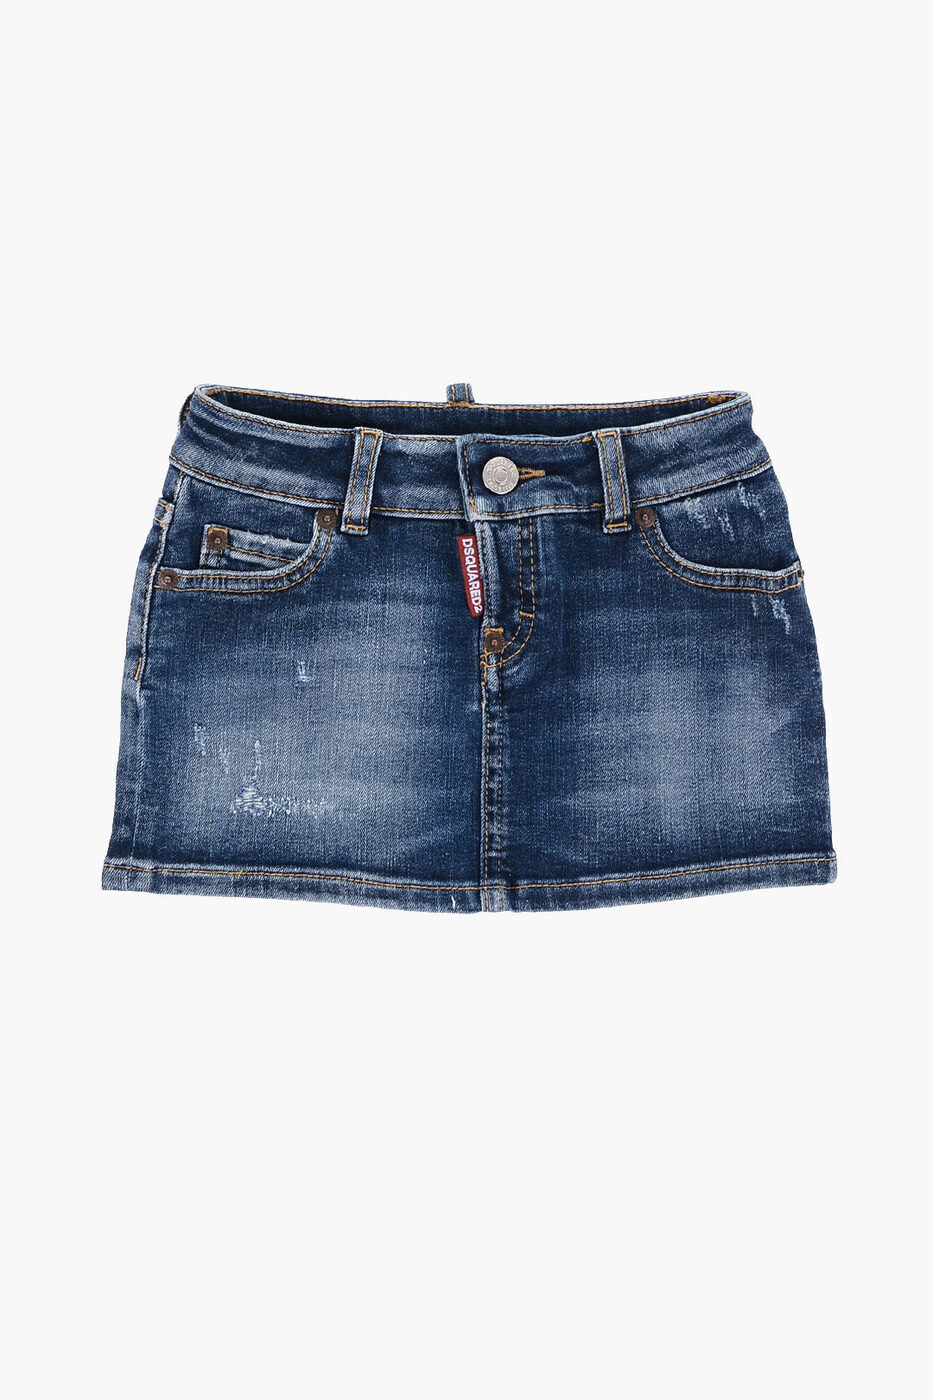 DSQUARED2 ディースクエアード スカート DQ01W4 D0A2P DQ01 ガールズ STRETCH DENIM SKIRT WITH METAL ..